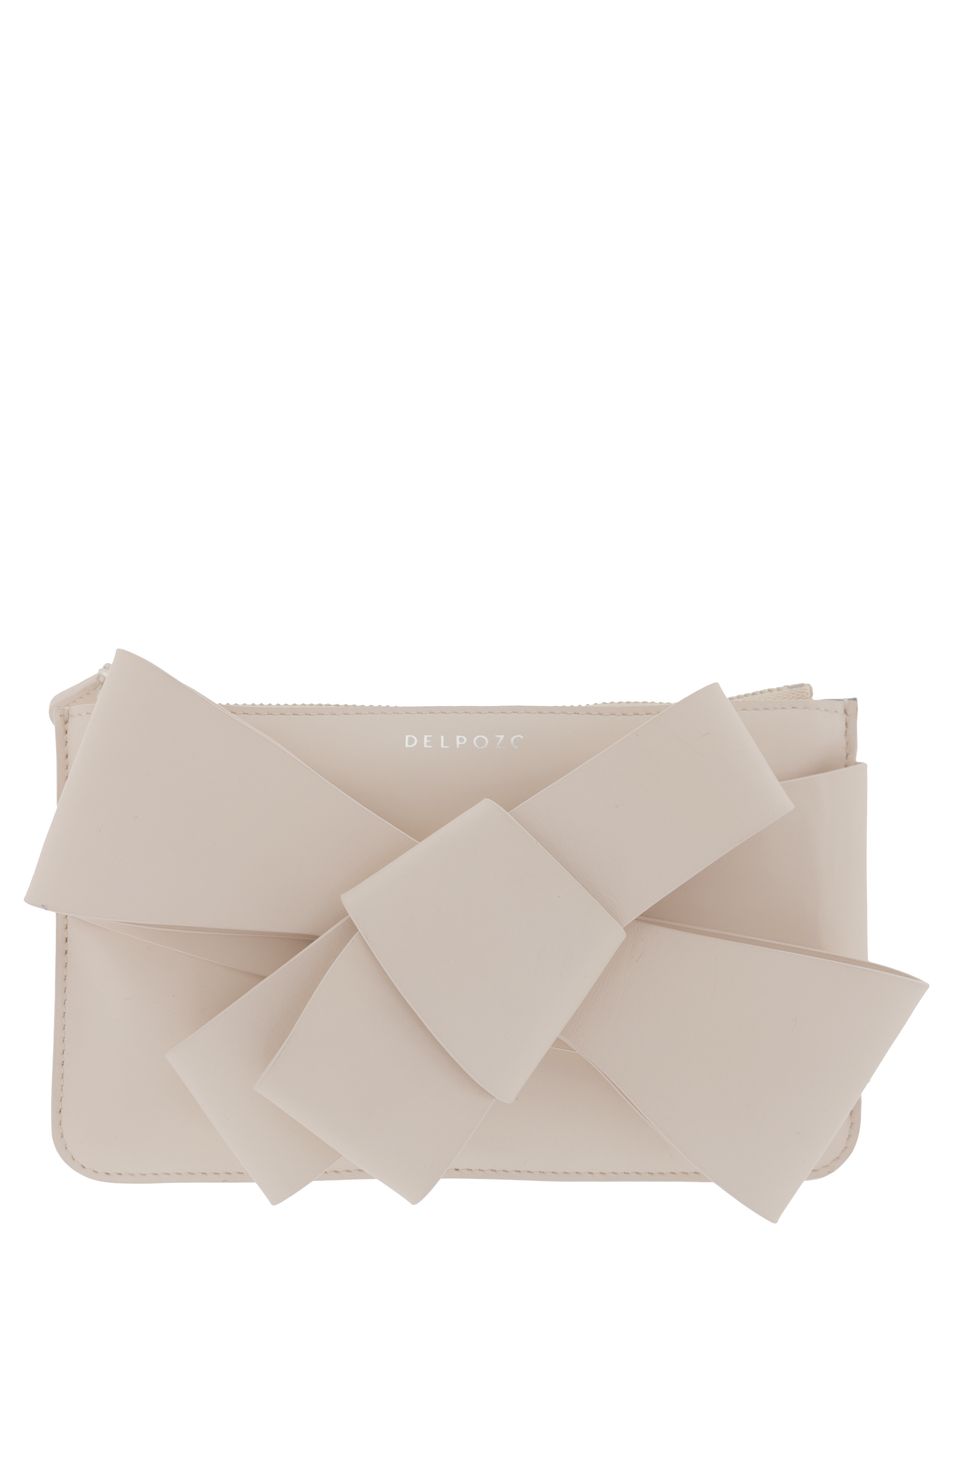 Beige, Paper, Paper product, Fashion accessory, Rectangle, 